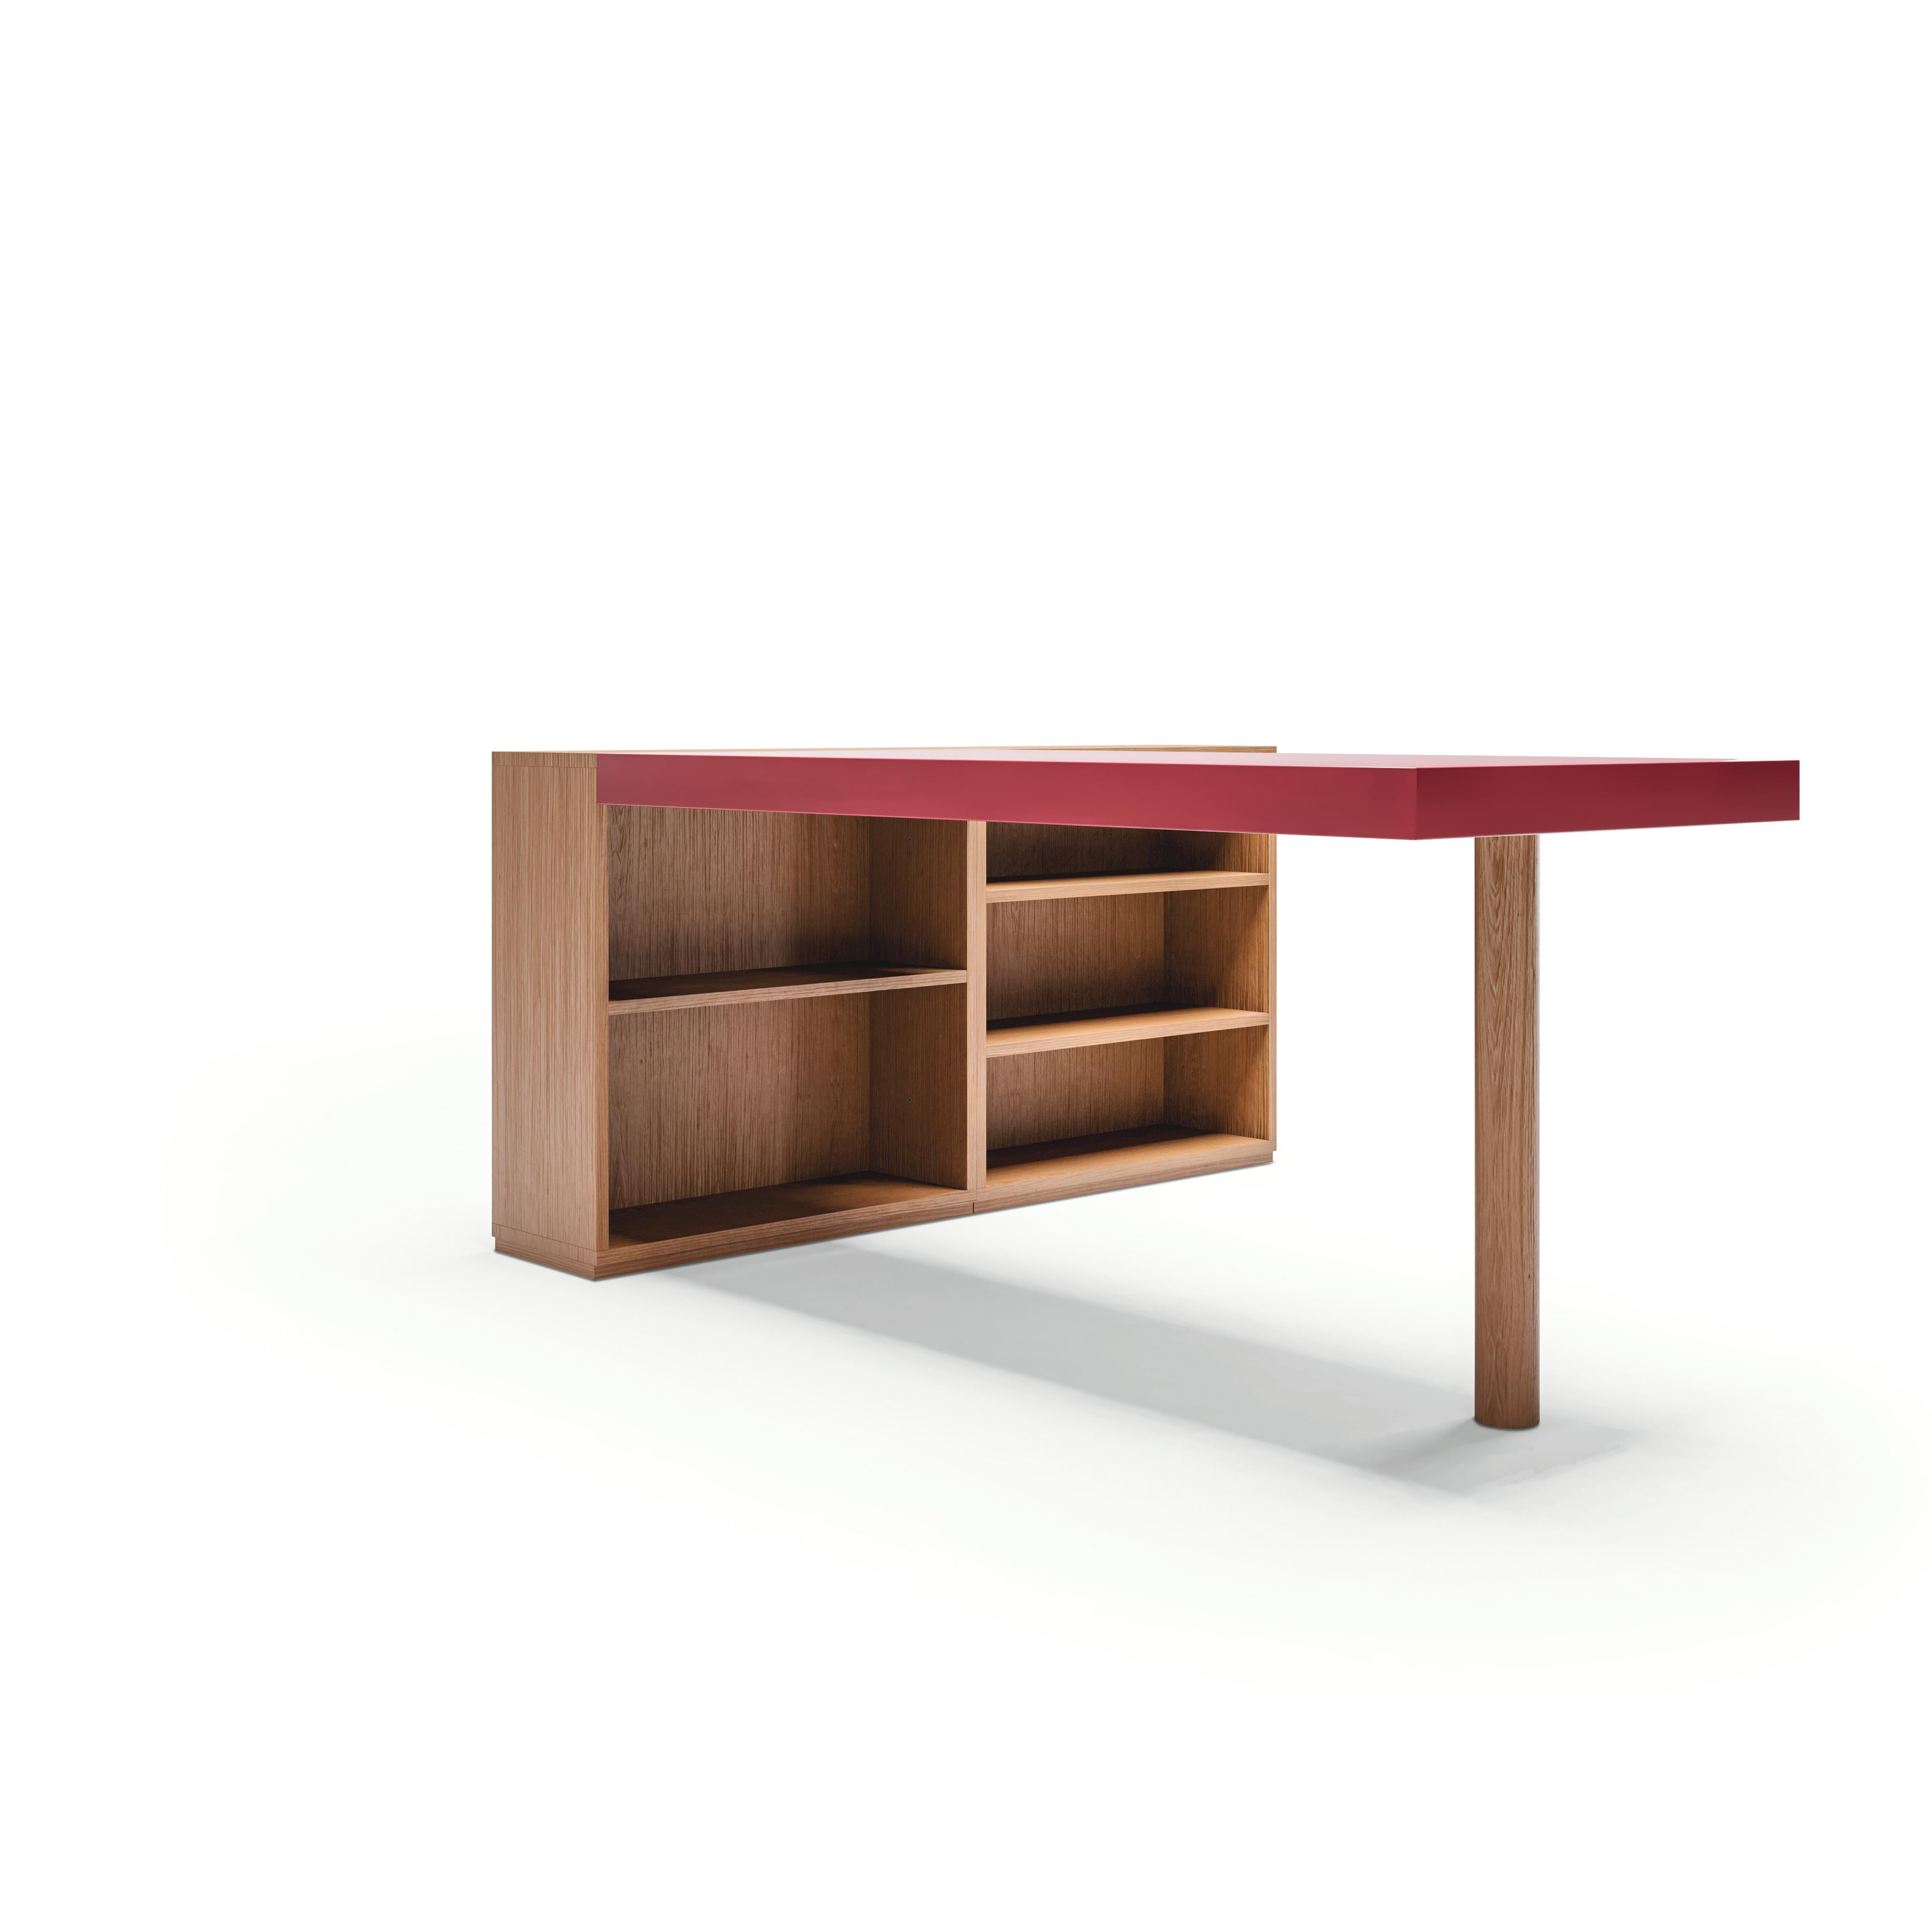 LC16 desk by Le Corbusier for Cassina.

Working closely with the
Fondatiòn Le Corbusier and
maintaining the utmost respect for
its original design, Cassina re-edits
the LC16 Bureau desk, designed
in 1957 as an everyday desk for
the